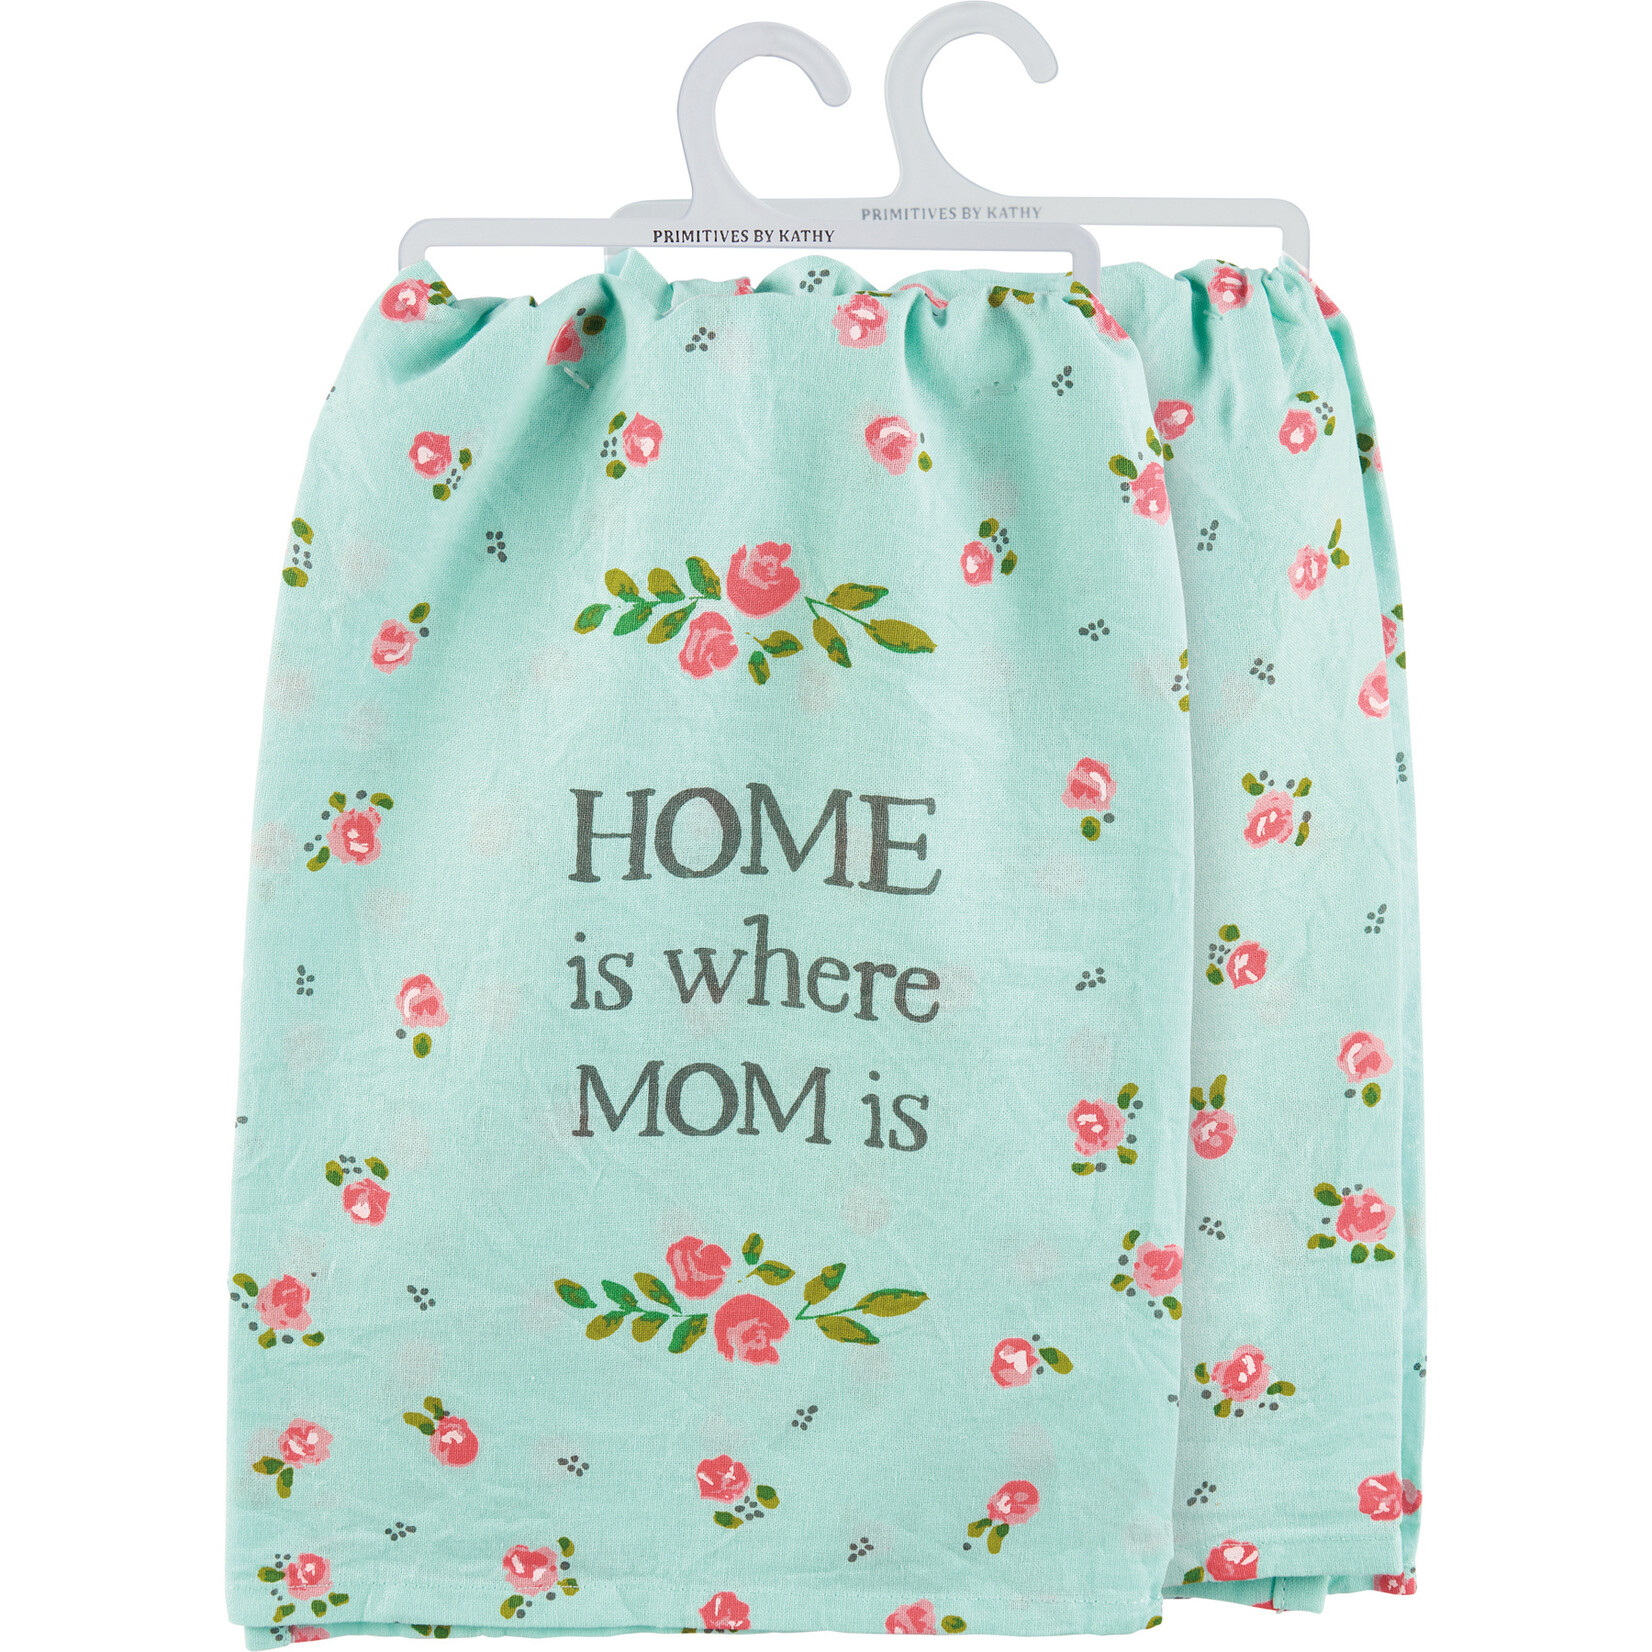 Primitives by Kathy Primitives by Kathy Home Is Where Mom Is Kitchen Towel